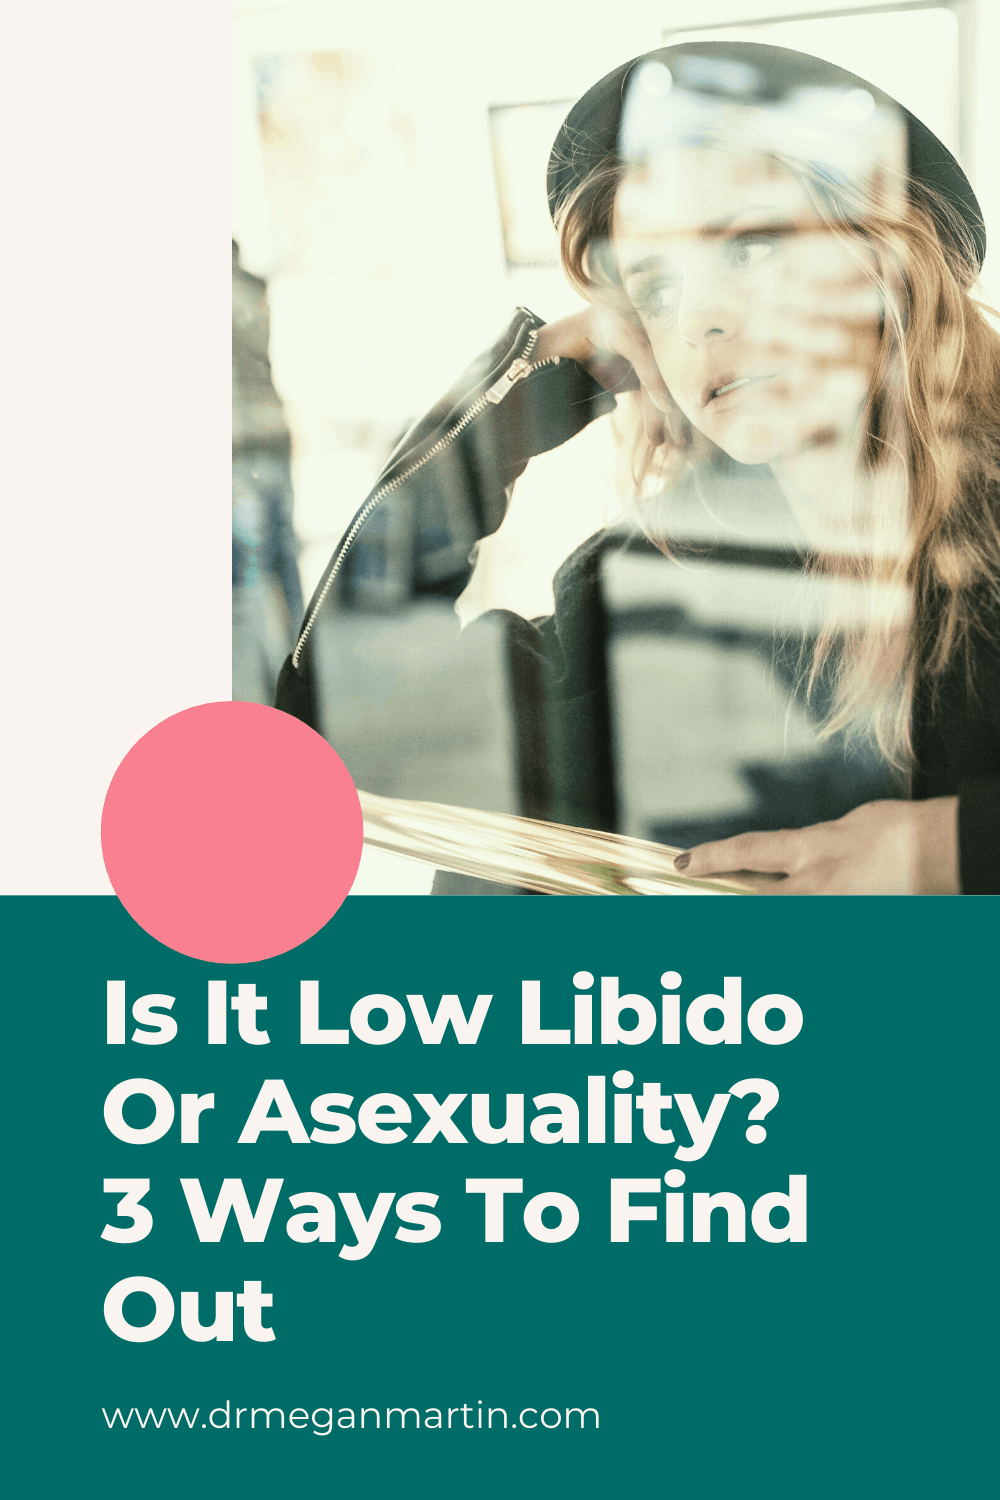 Woman wondering if she is asexual or just has low libido